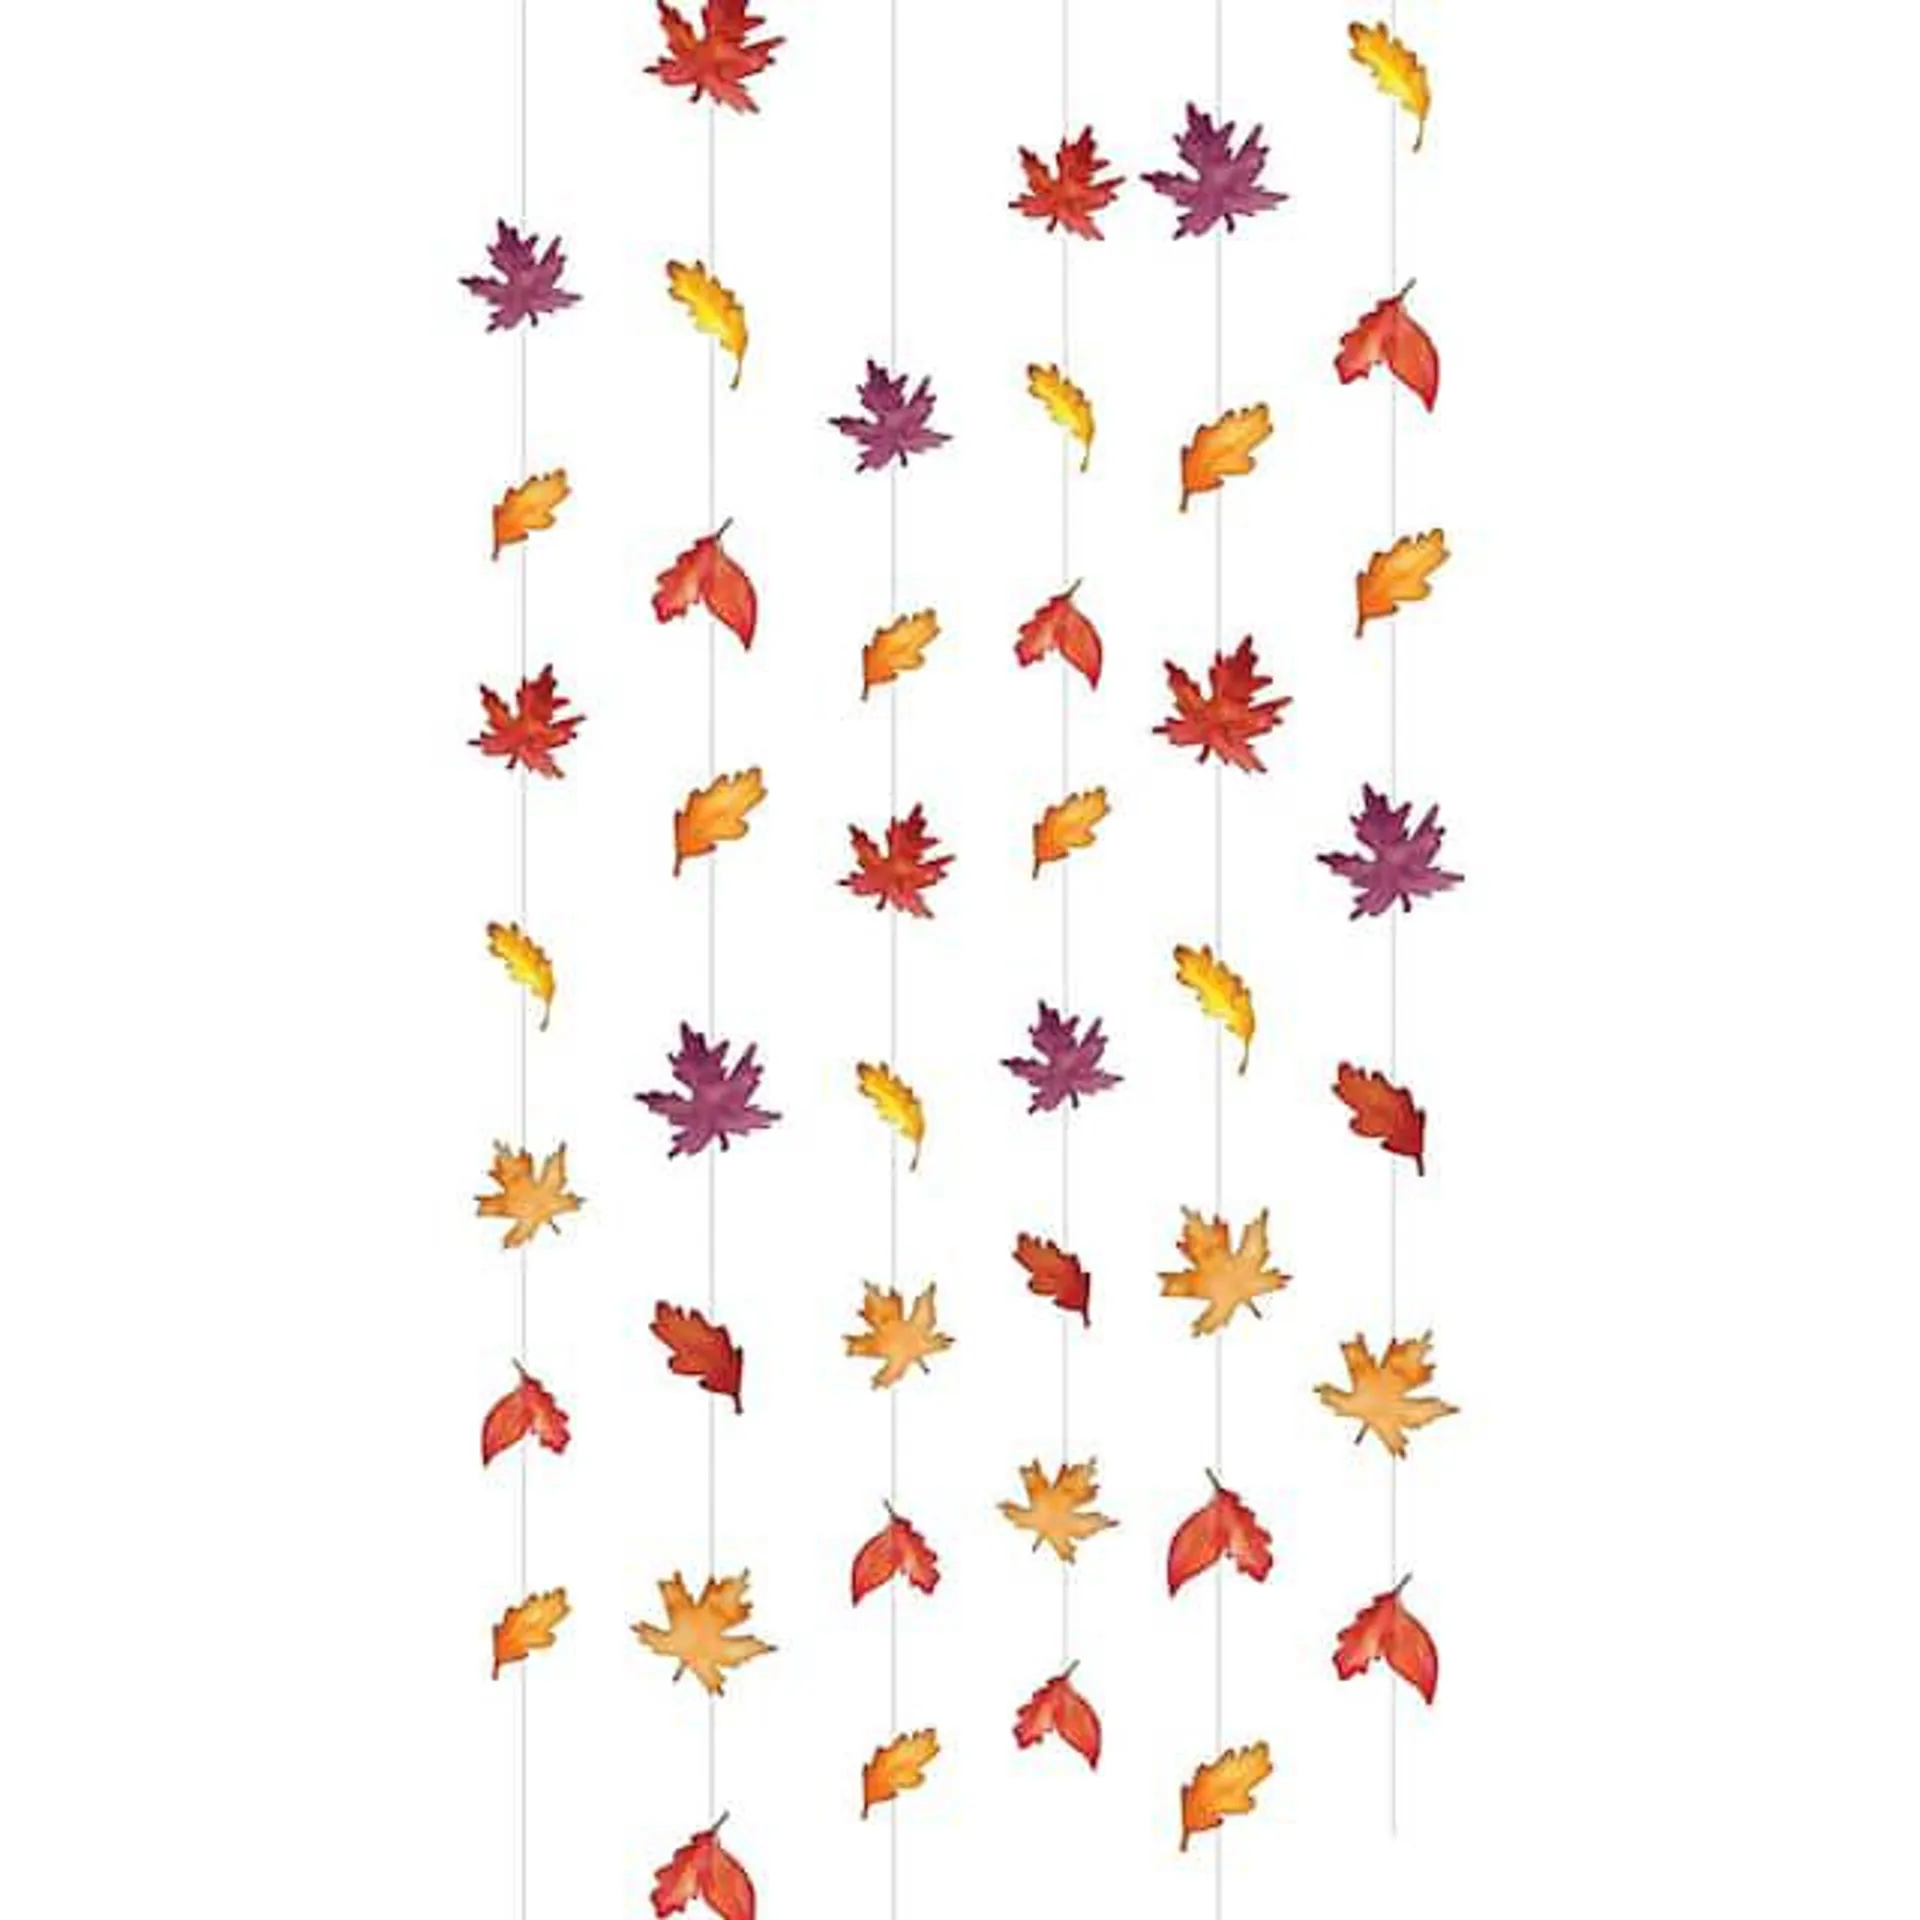 Hanging Leaves String, Multi-Coloured, 11 3/4 in, Indoor/Outdoor Decoration for Fall